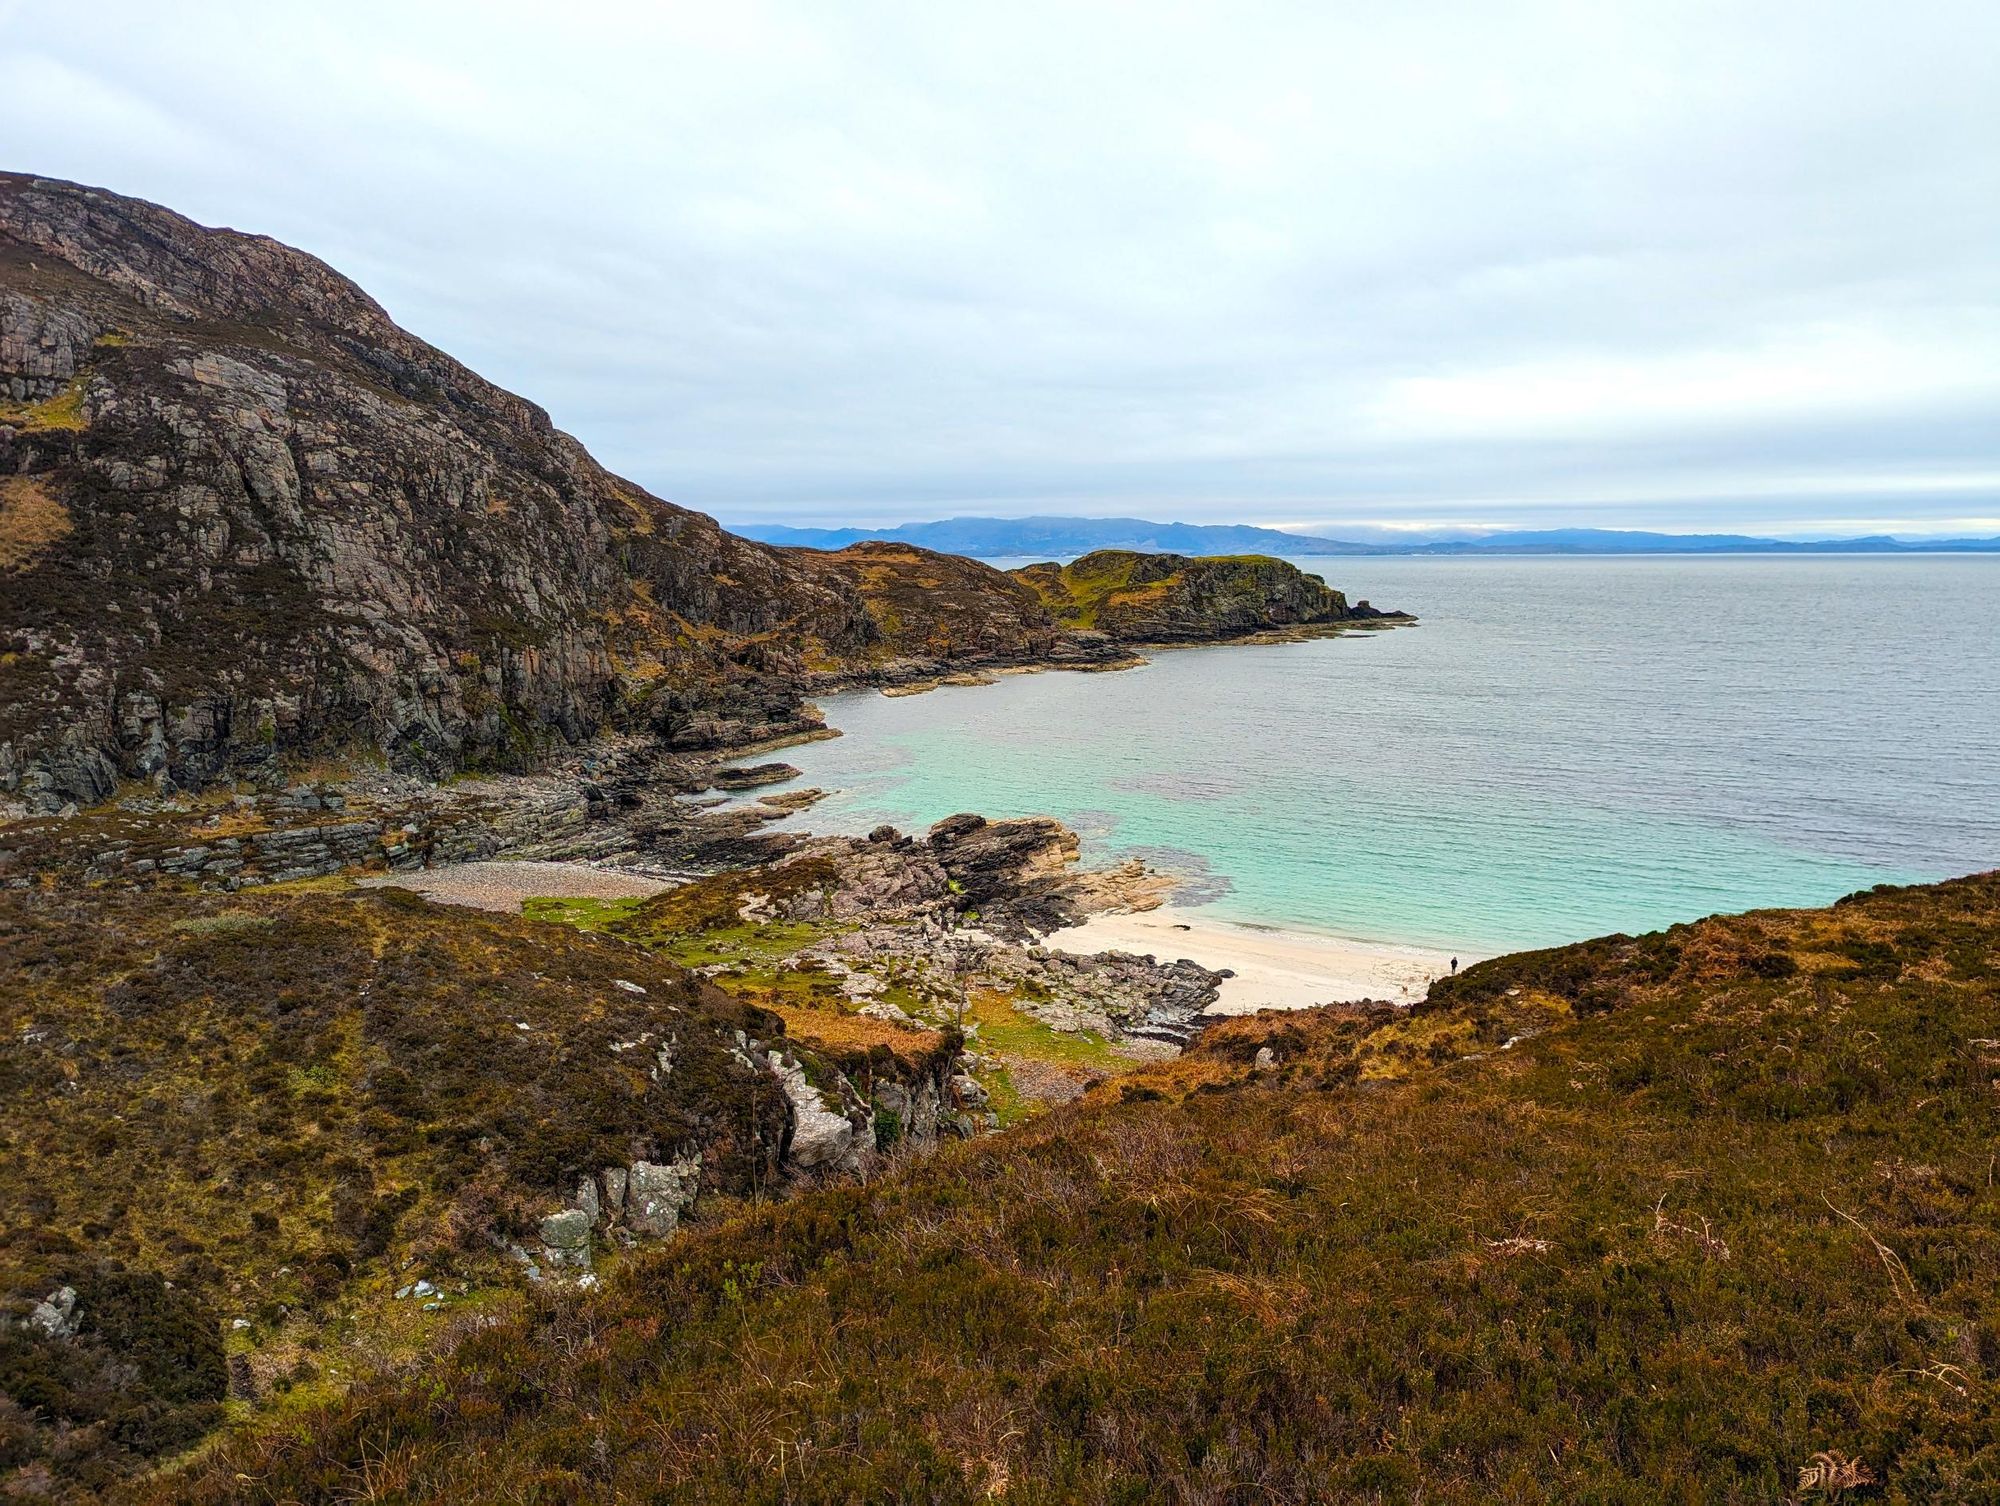 Camas Daraich, home to a stunning sandy beach which is often empty. Photo: Stuart Kenny